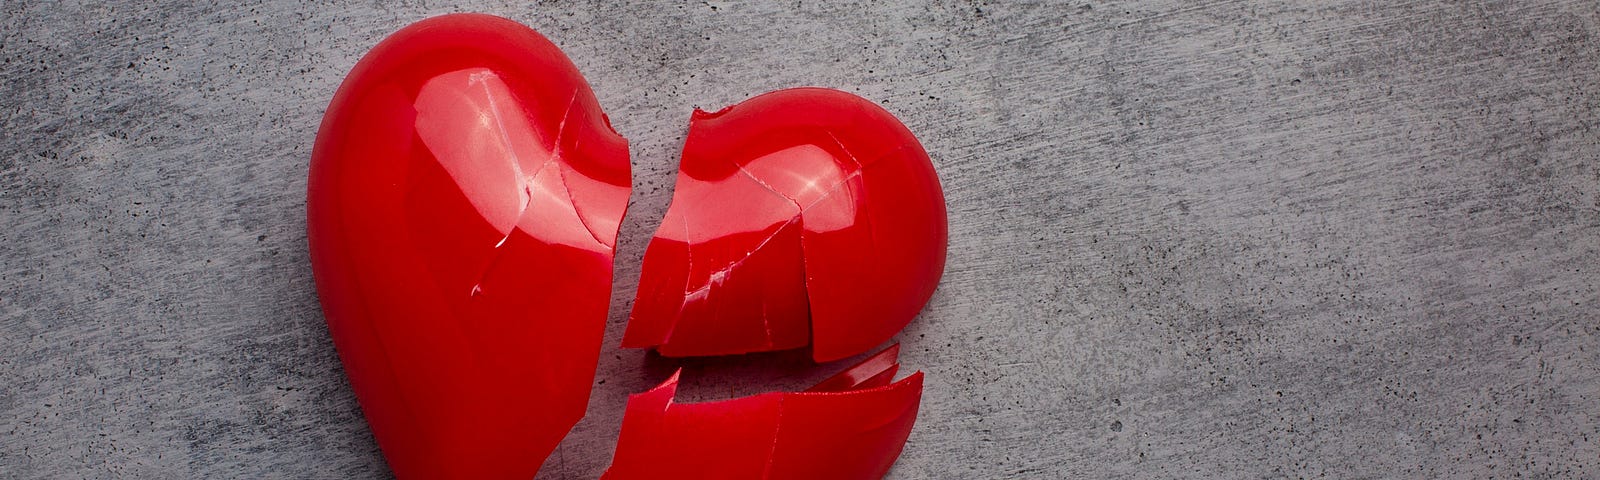 This photo shows a red plastic heart that is broken into three pieces.